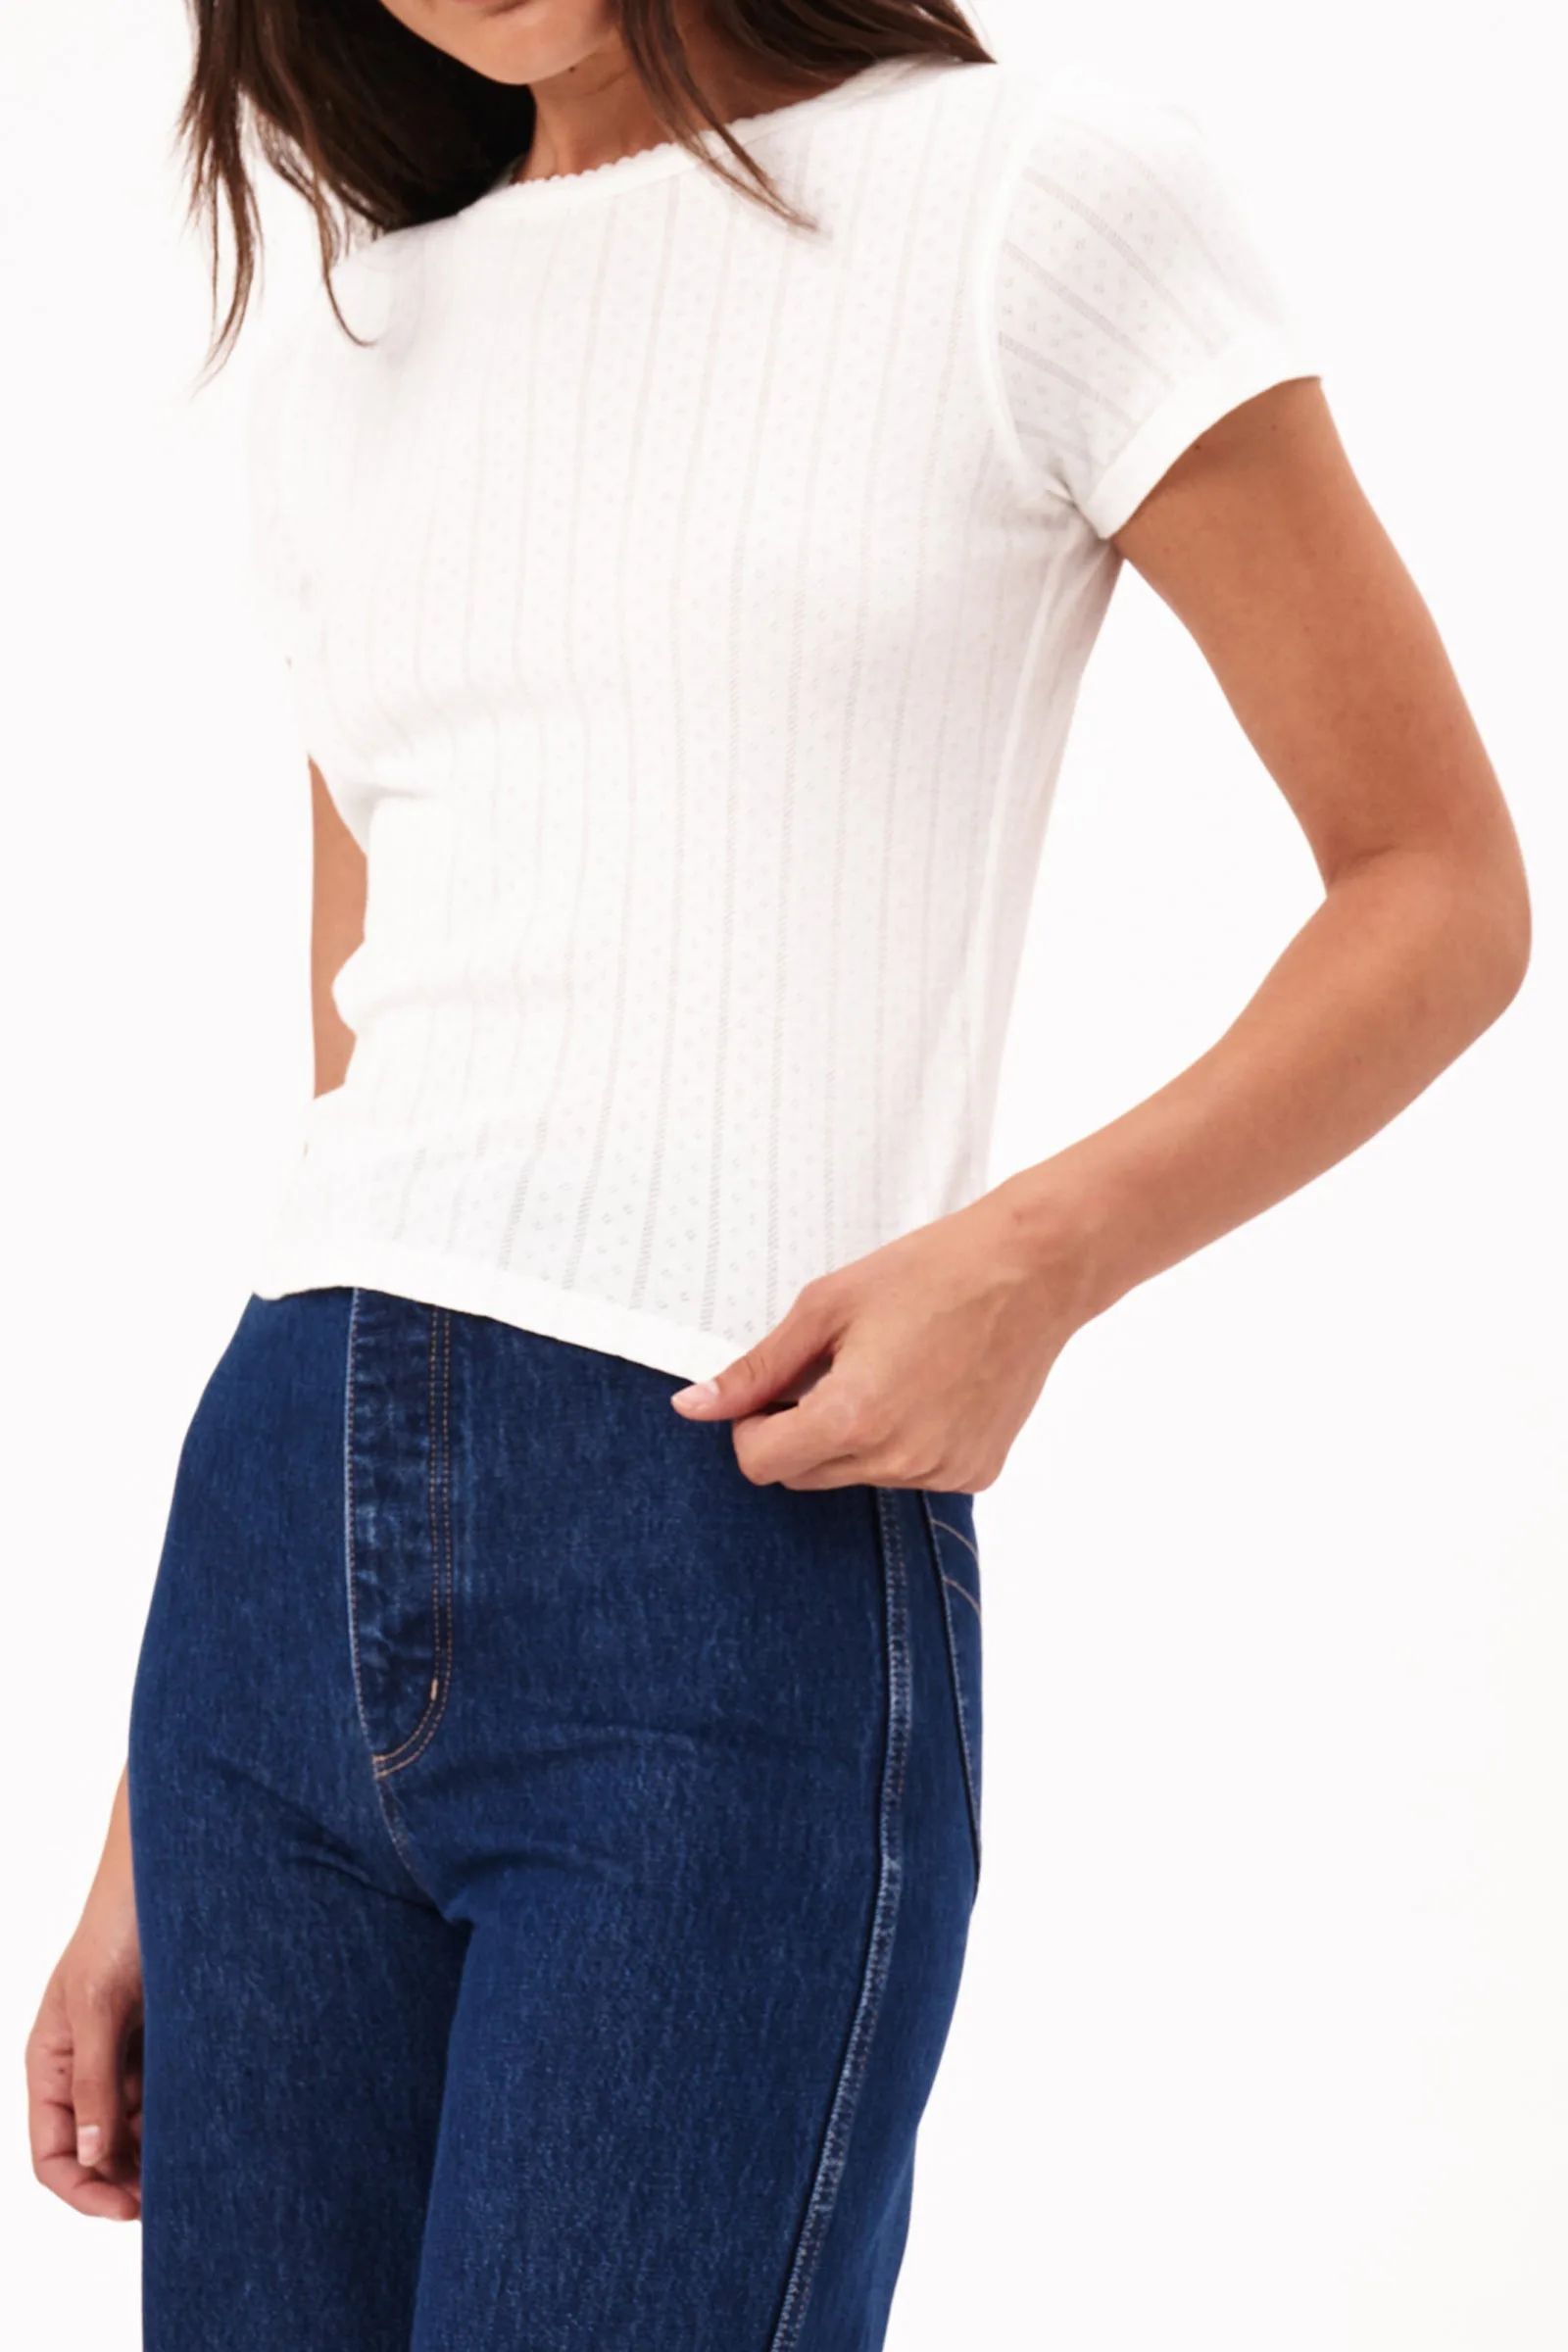 Buy Classic Pointelle Tee - Cream Online | Rollas Jeans | Rolla's Jeans US/CAN